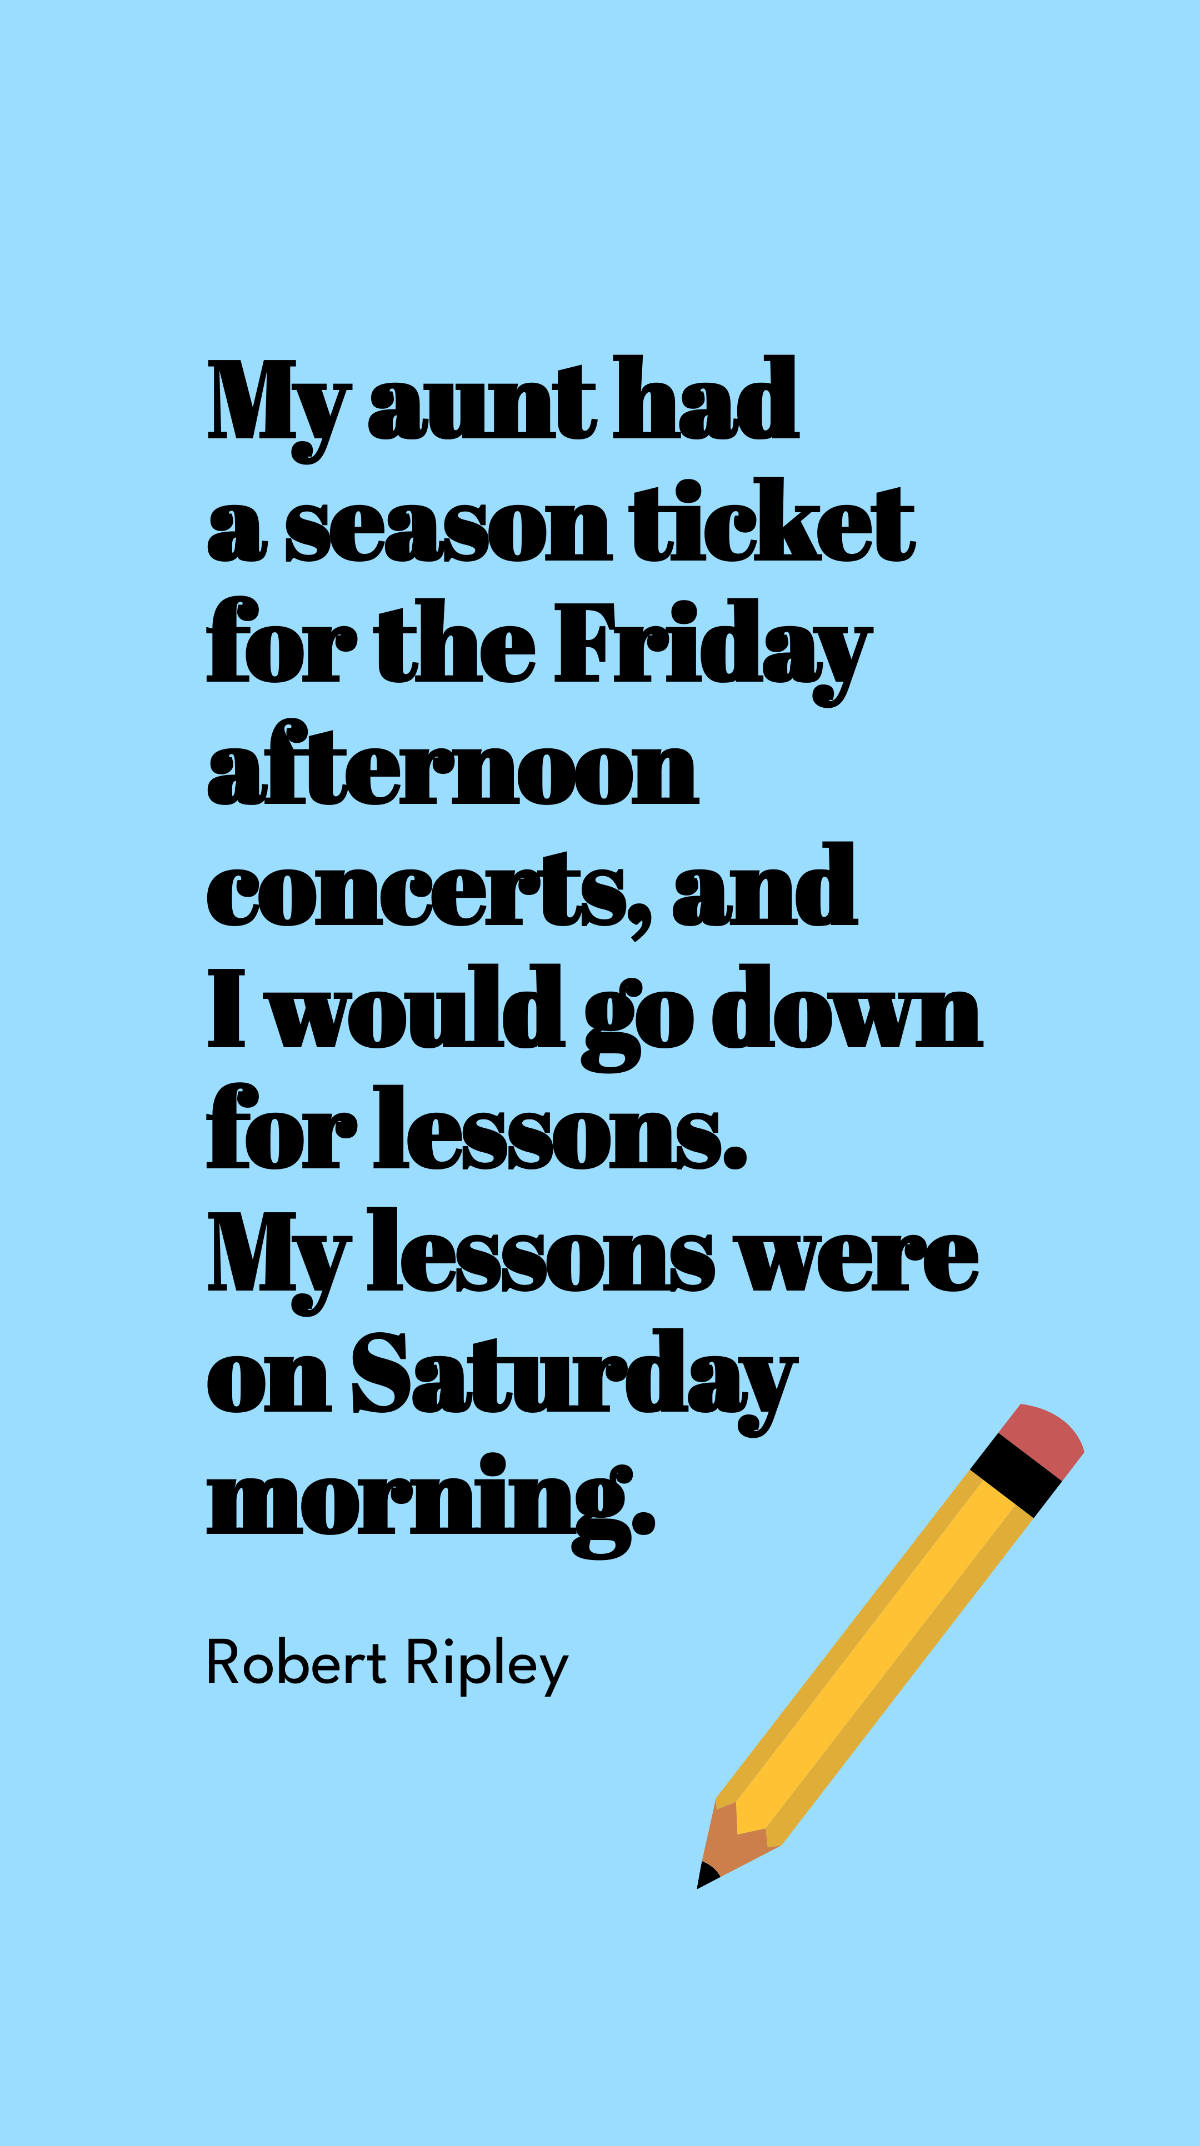 Robert Ripley - My aunt had a season ticket for the Friday afternoon concerts, and I would go down for lessons. My lessons were on Saturday morning. Template